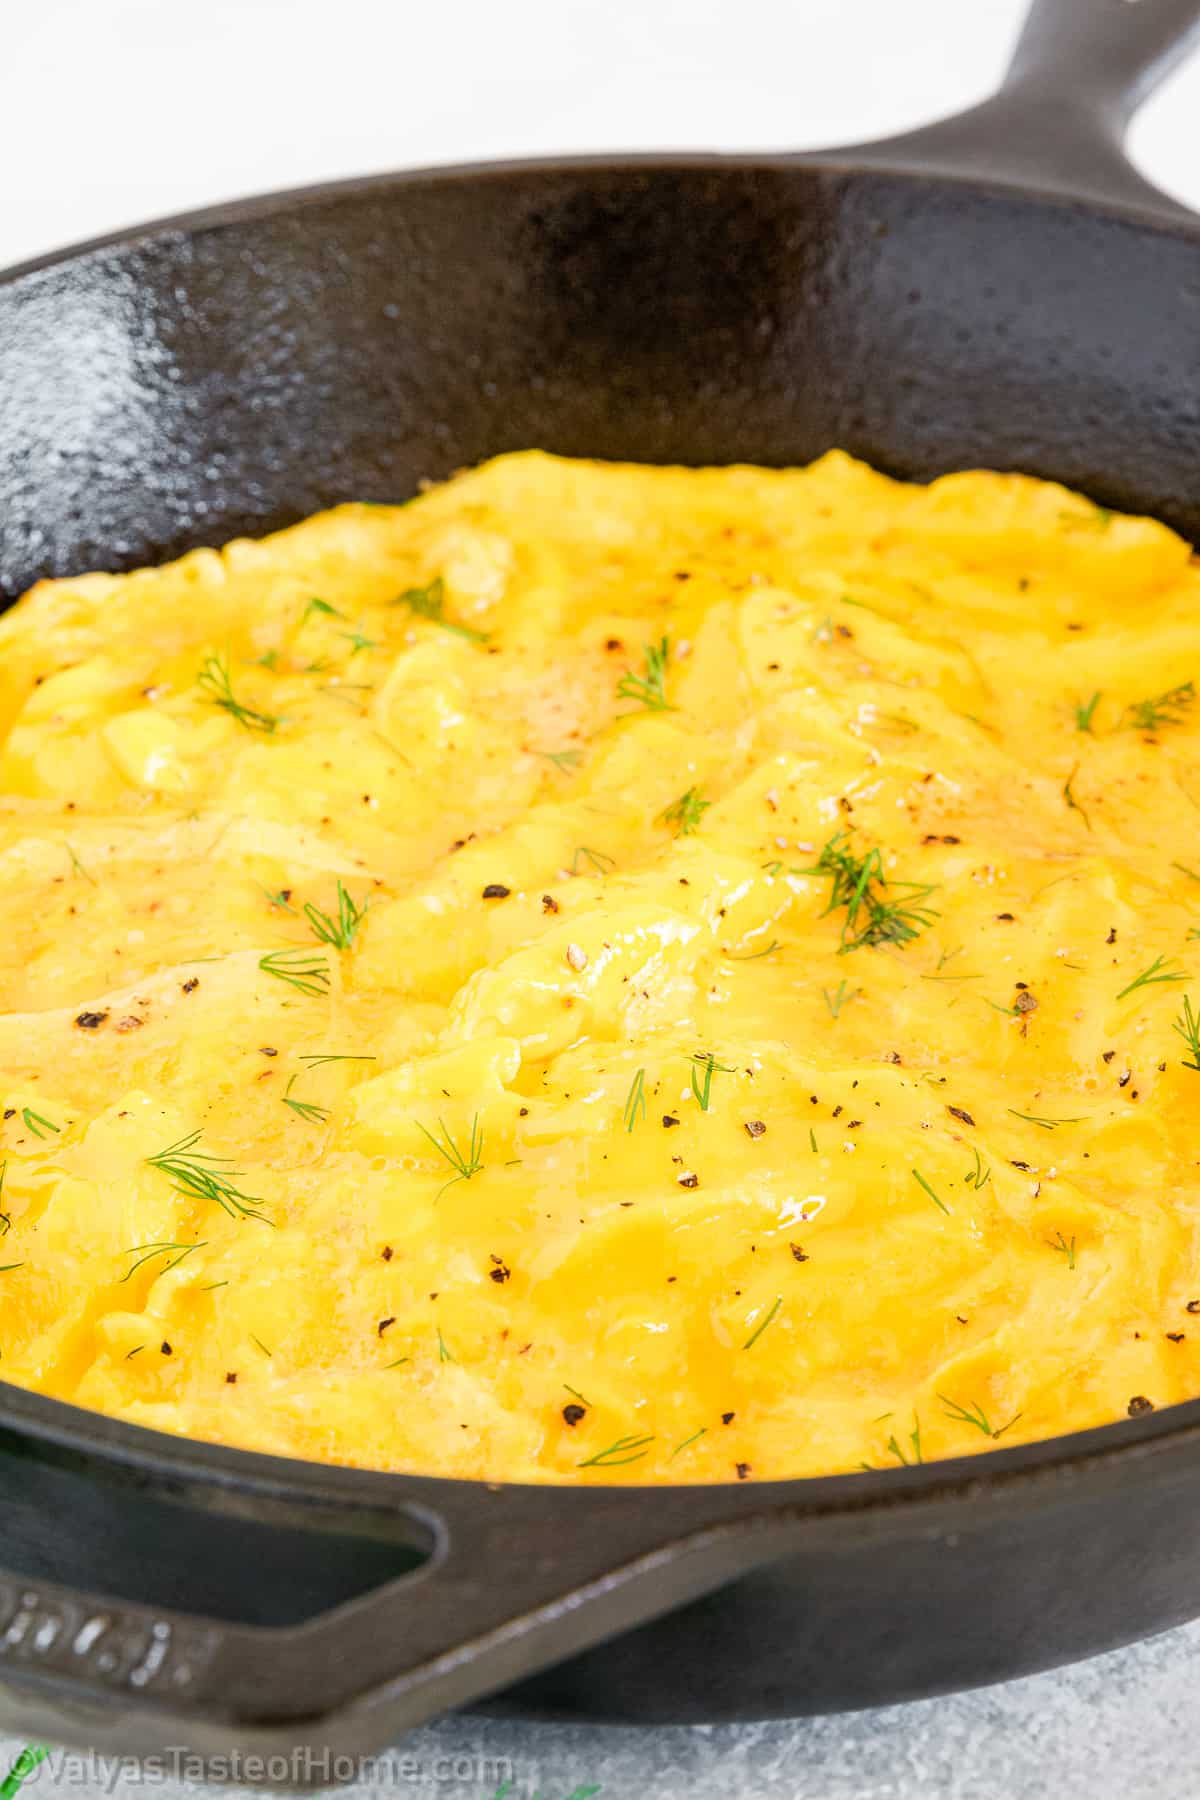 How to Make Scrambled Eggs (Perfectly Fluffy Every Time!)